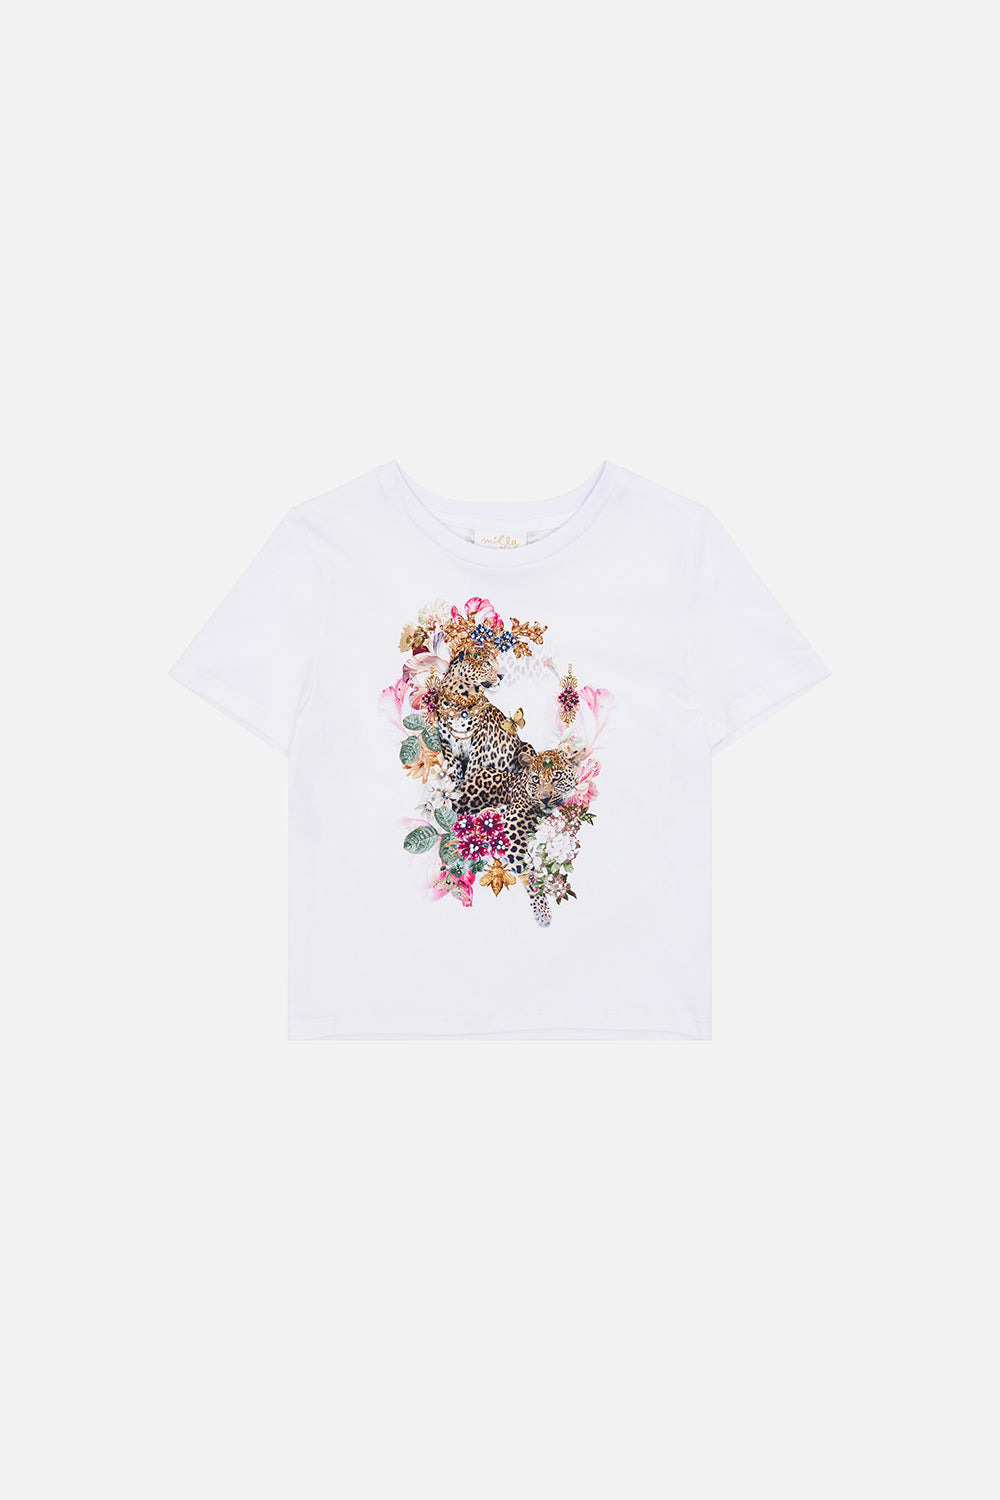 Product view of MILLA BY CAMILLA kids t-shirt in Bambino Bliss print